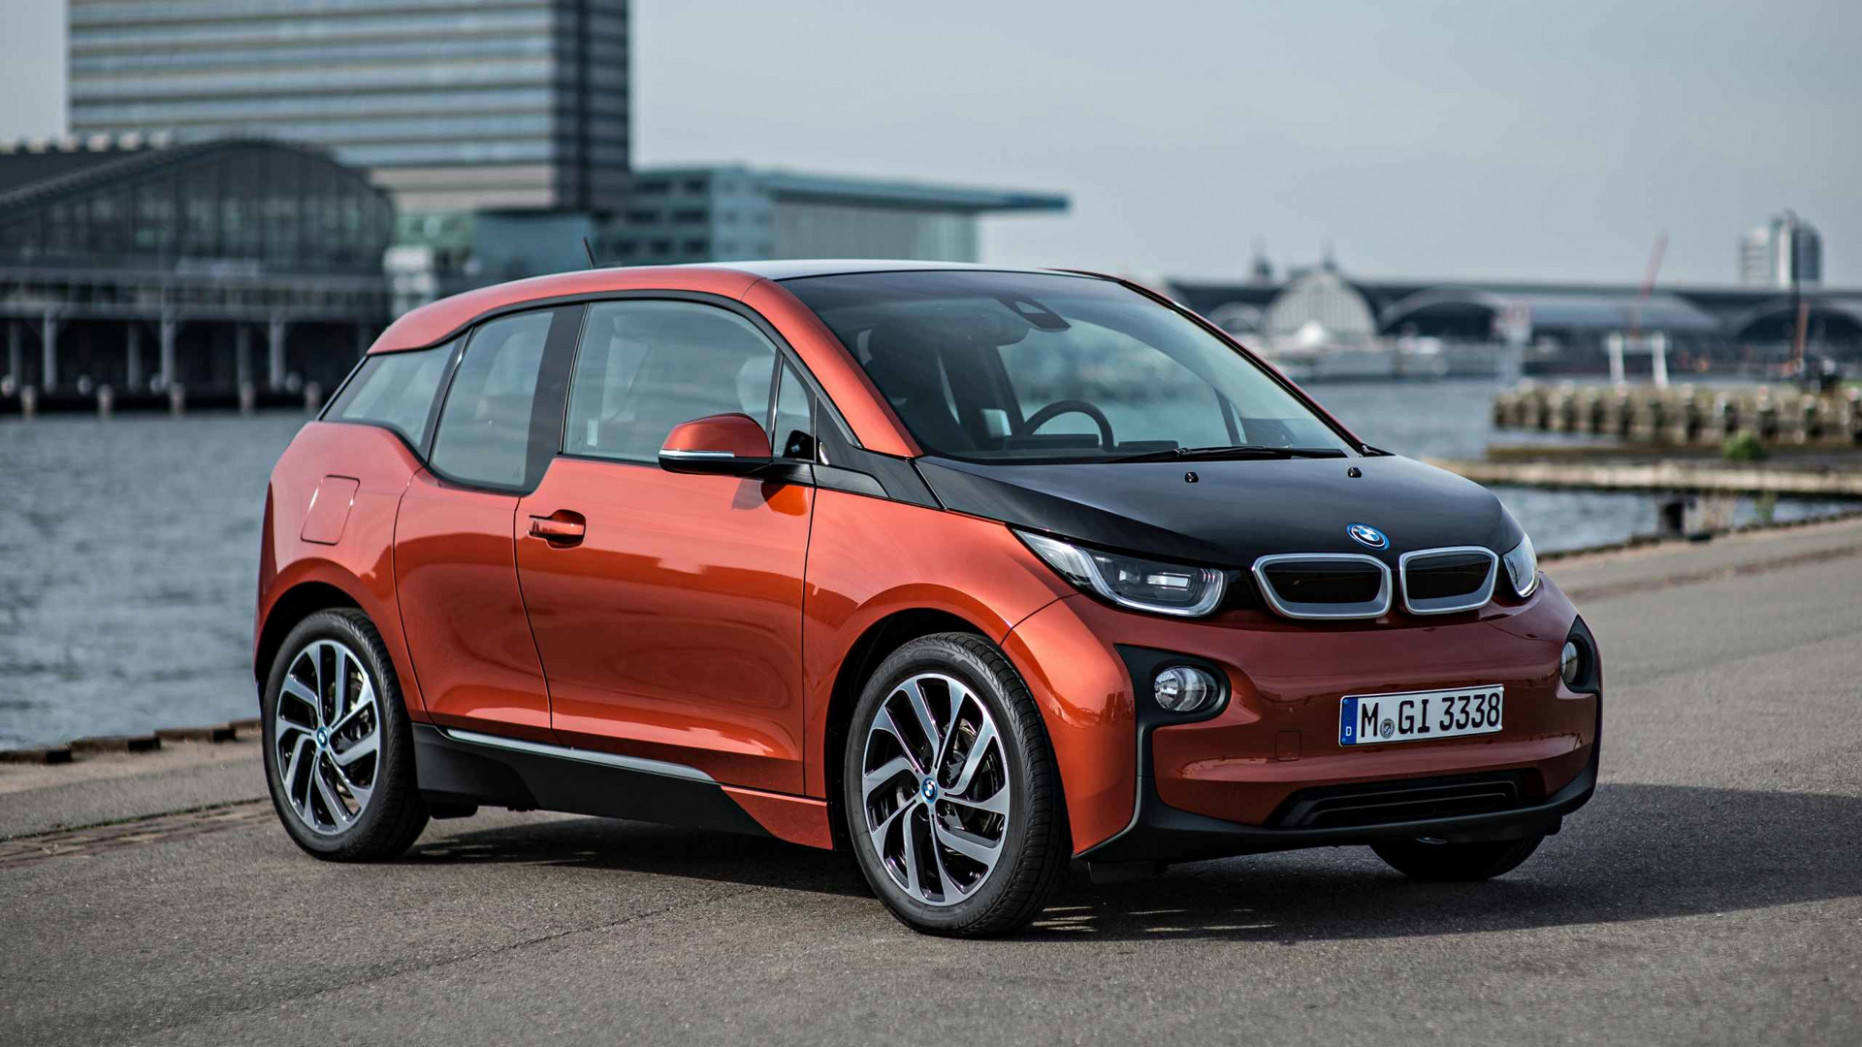 Price and Release date electric vehicles under 20k